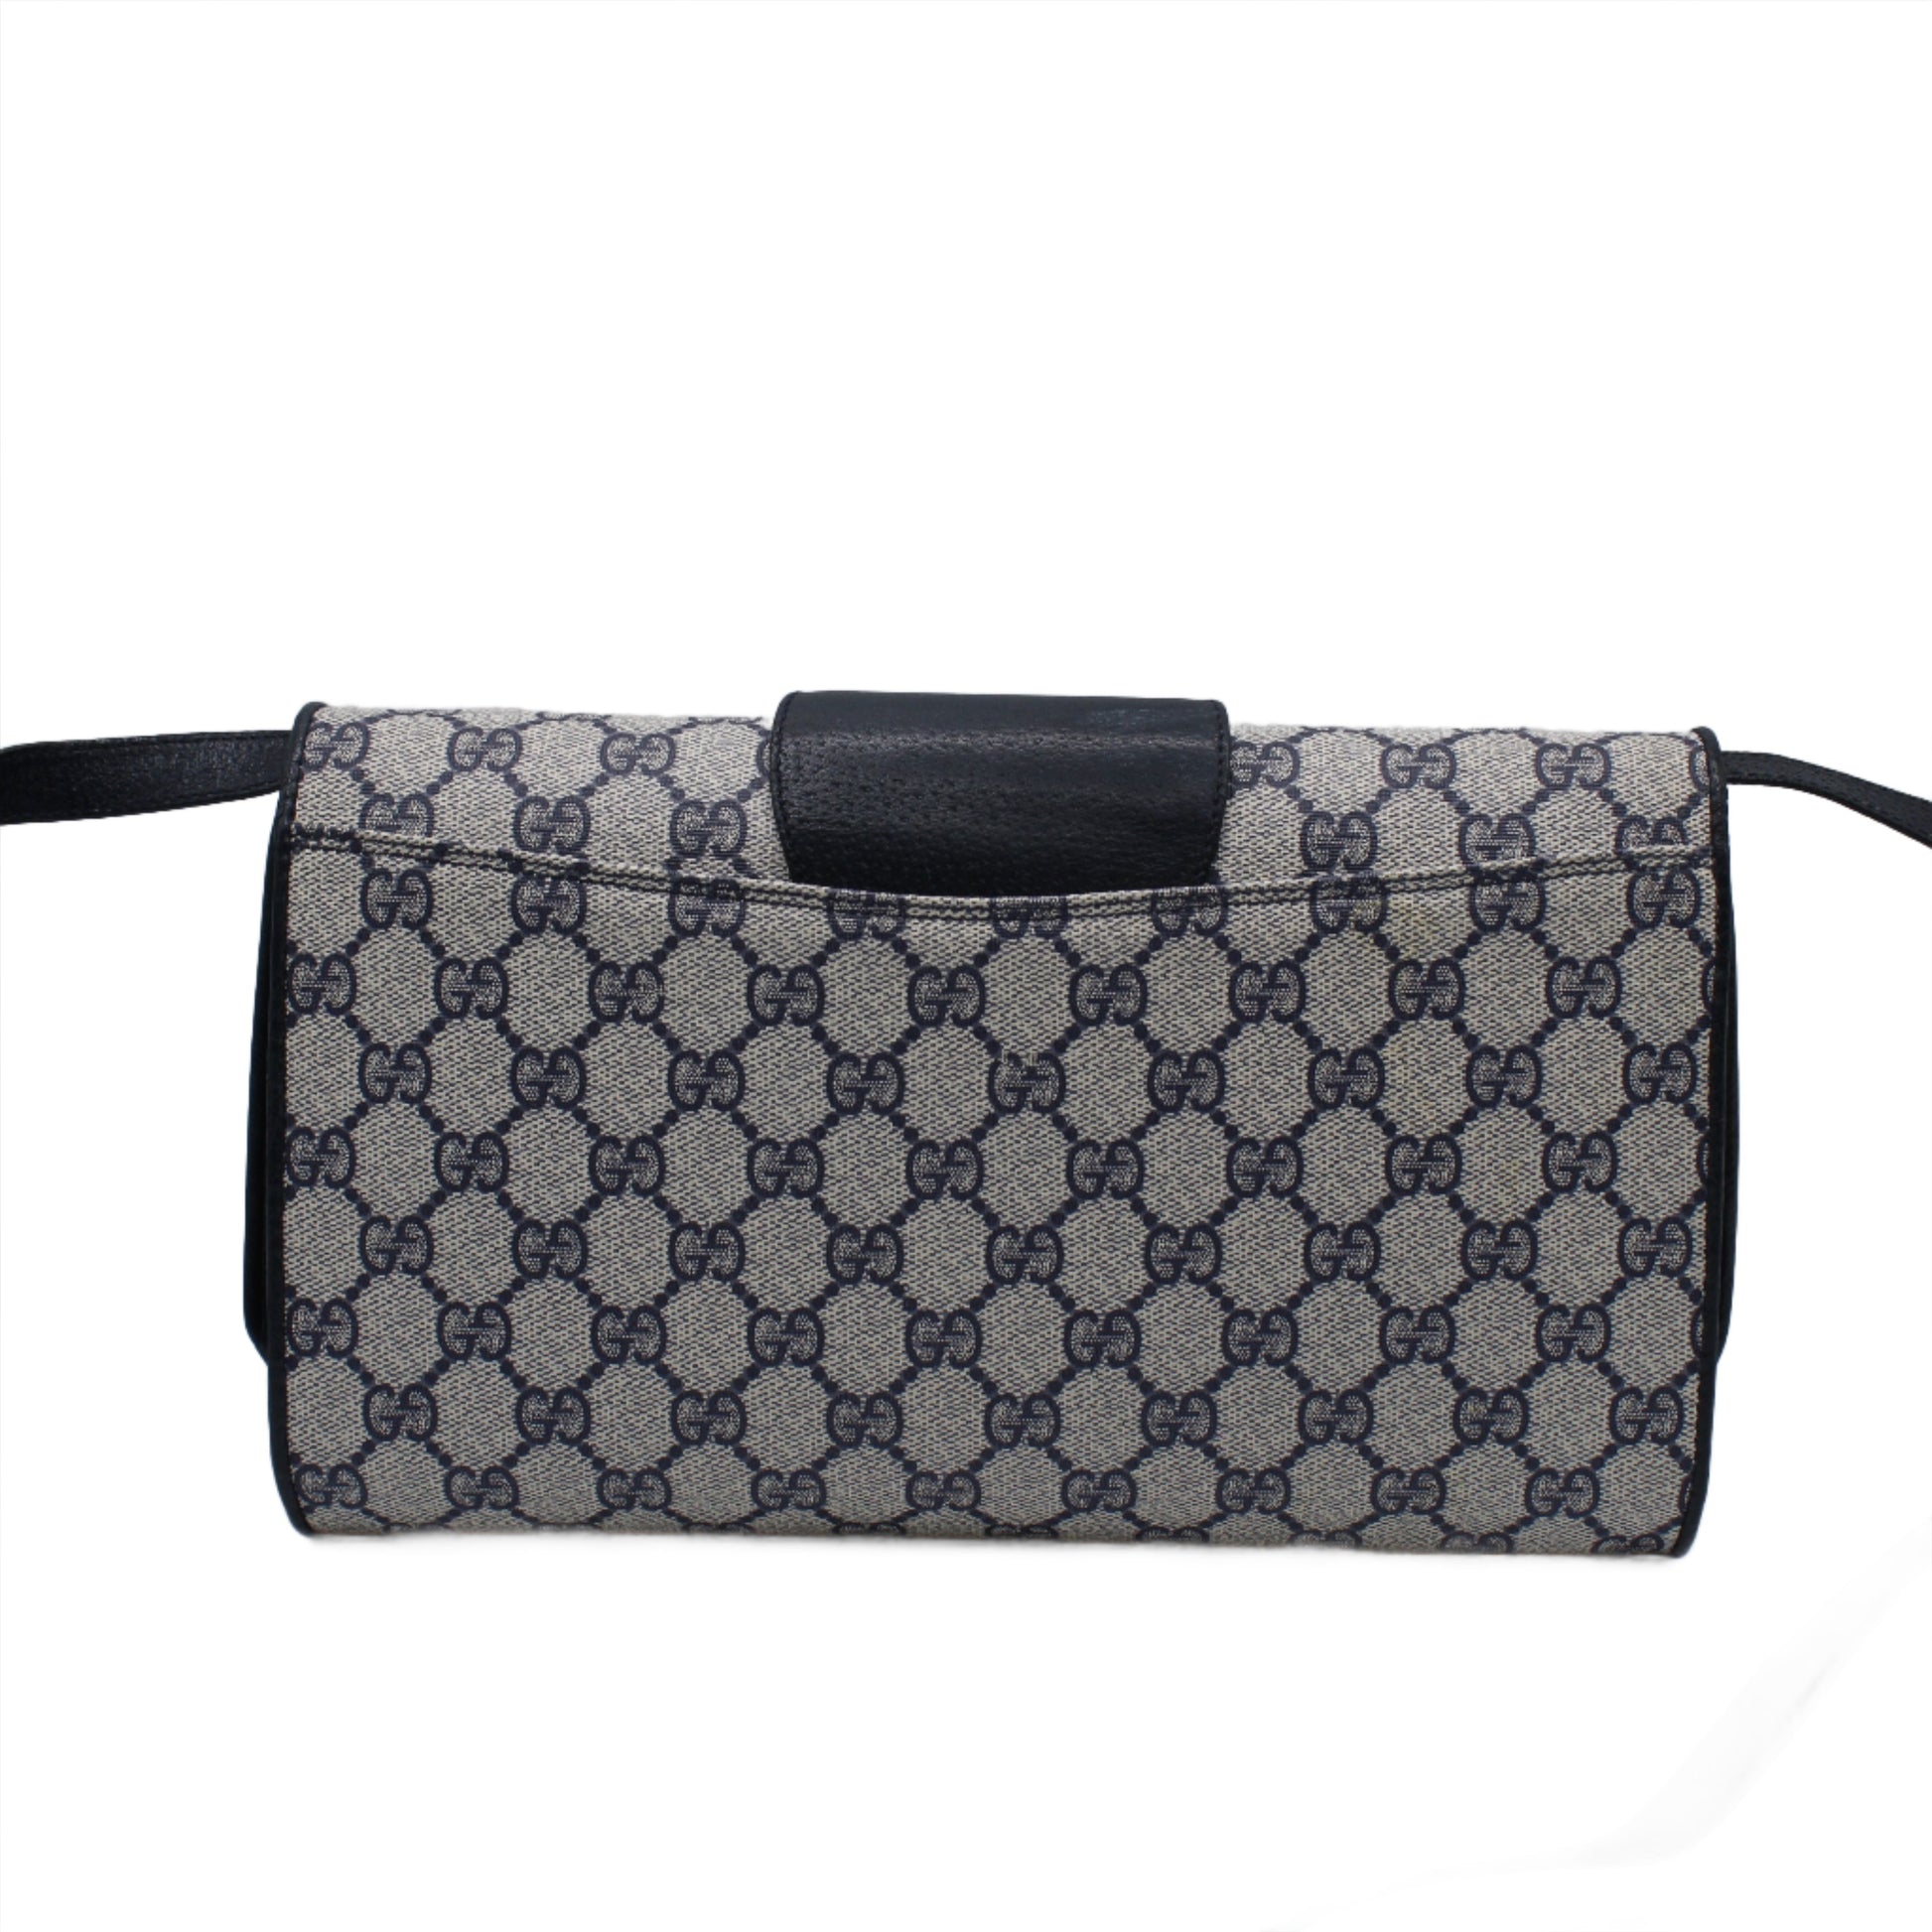 Gucci Navy GG Canvas and Leather Convertible Clutch Crossbody Bag back 